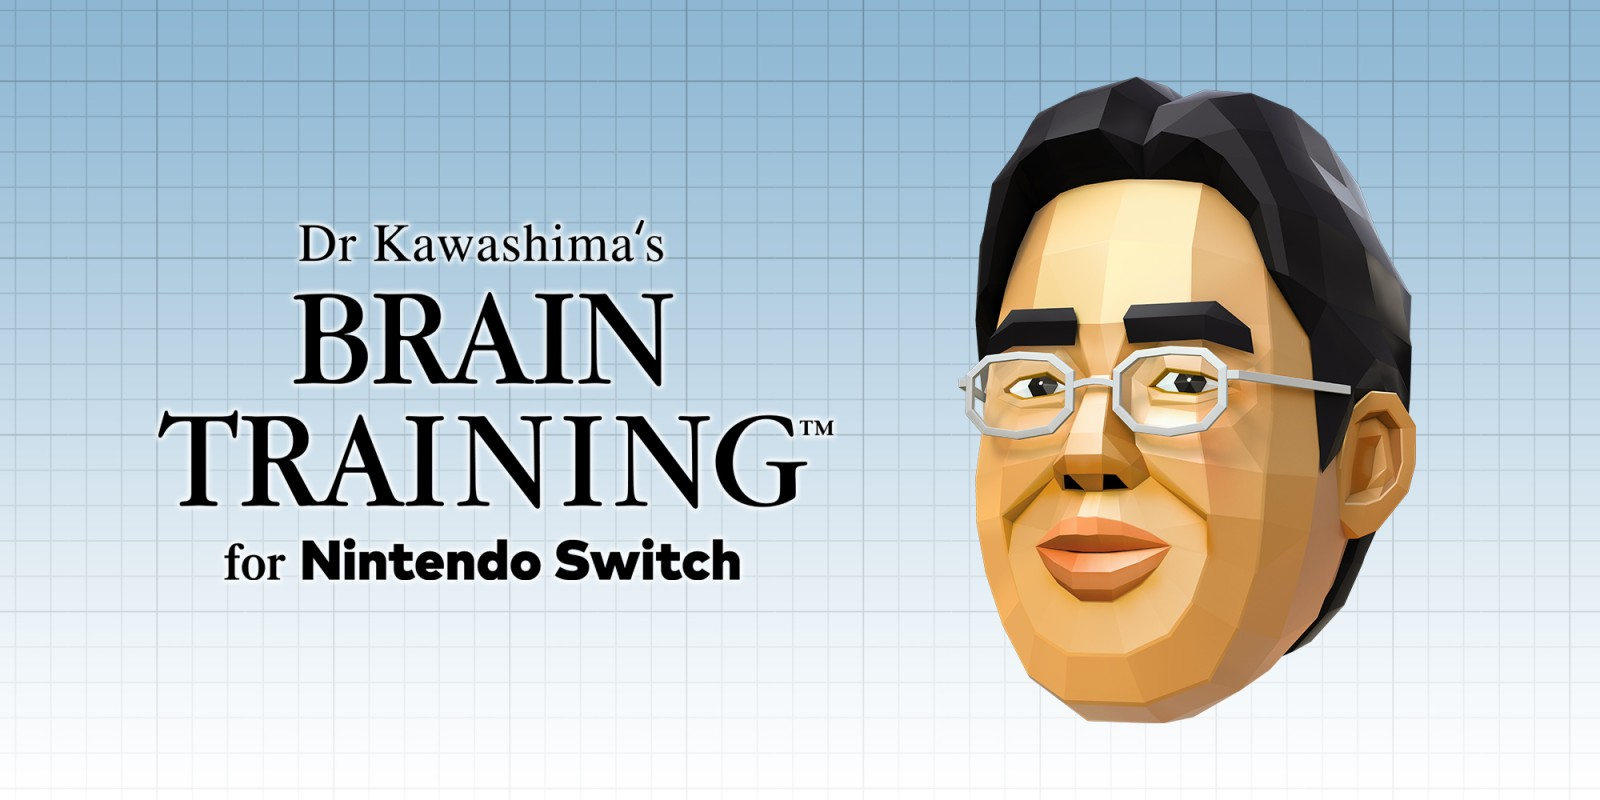 You are currently viewing Релизный трейлер Dr Kawashima’s Brain Training